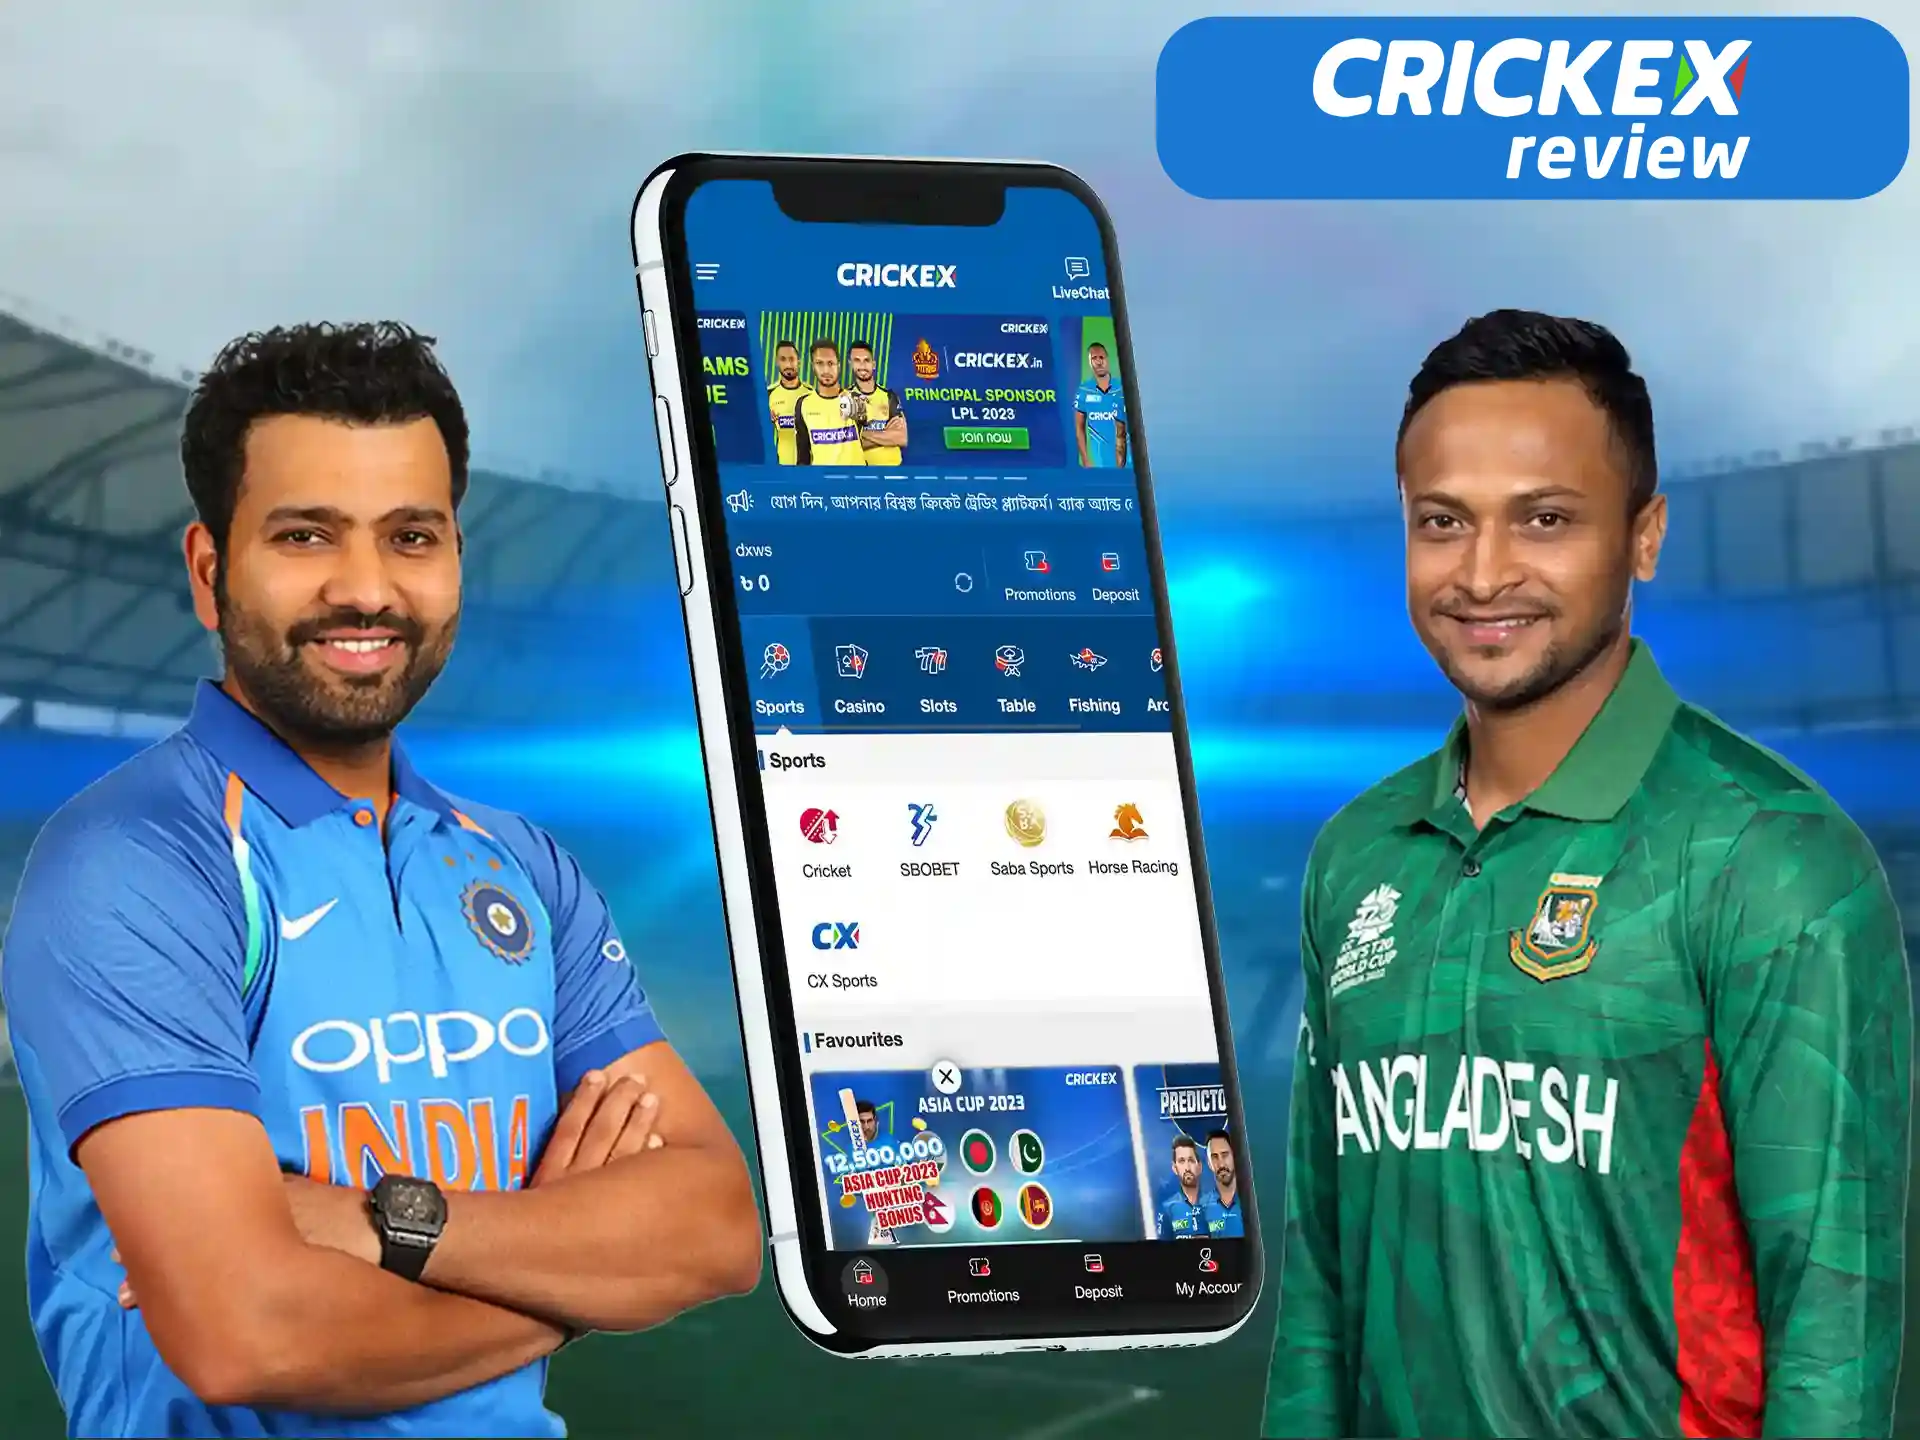 You will find lots of the cricket leagues and championships in the Crickex sportsbook.